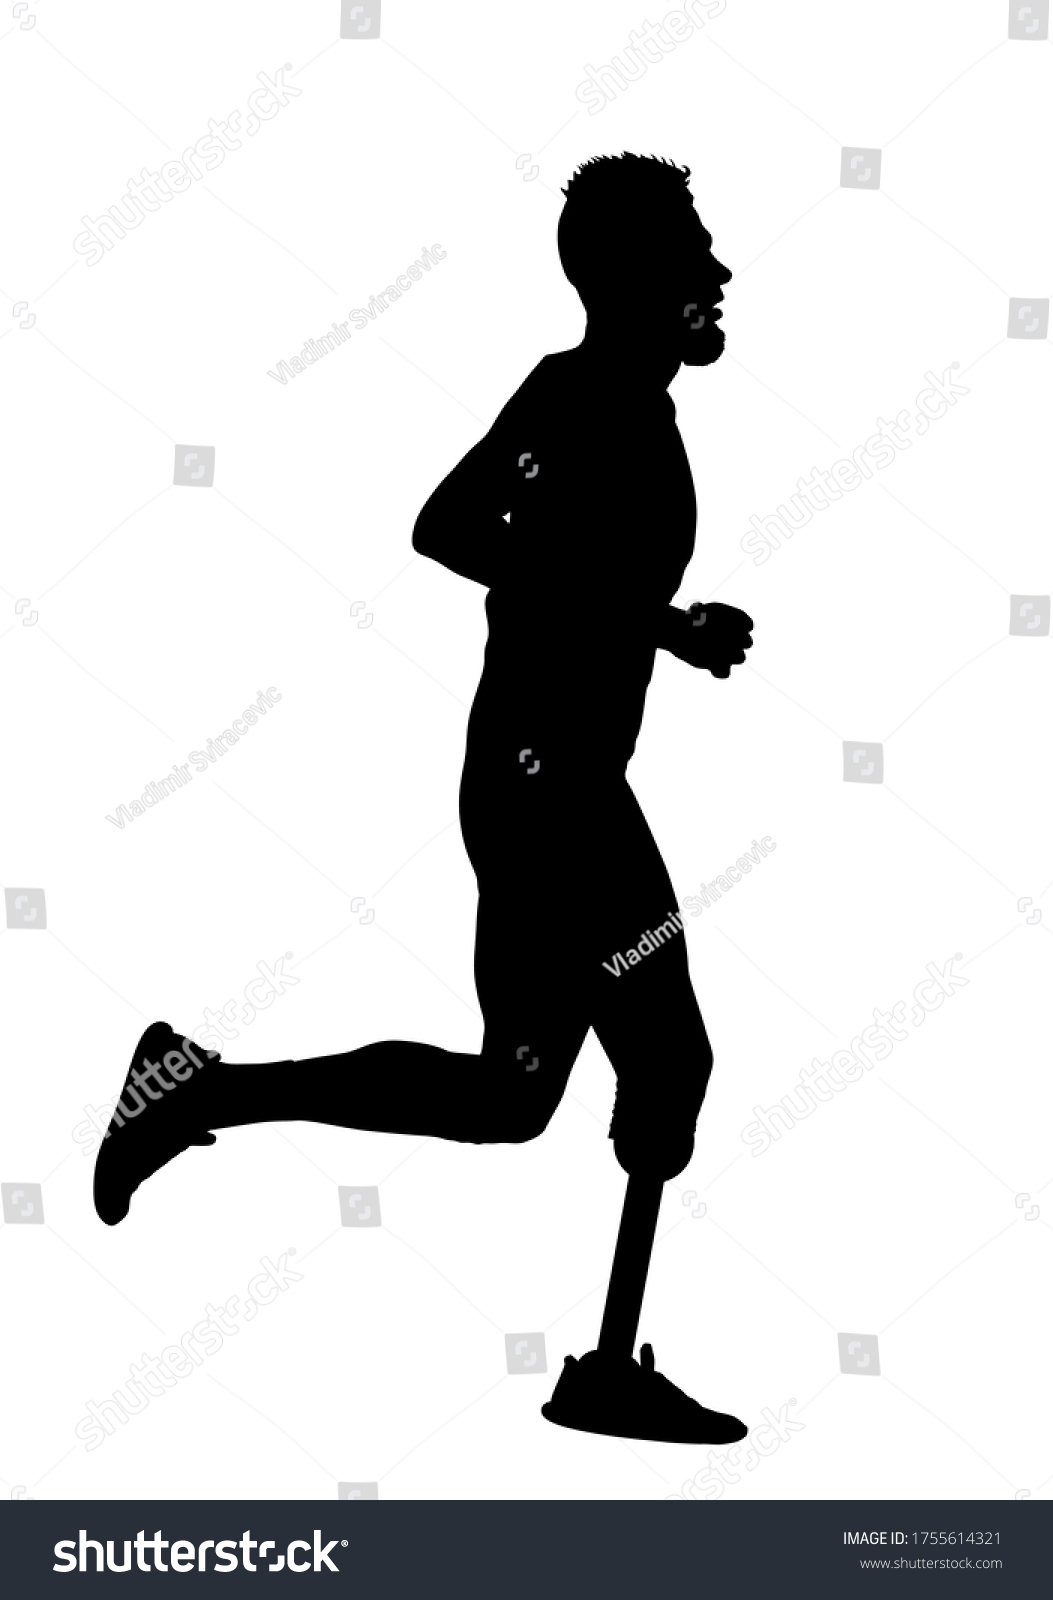 SVG of Sport man marathon runner with prosthetic leg vector silhouette illustration isolated on white background. Disabled sport boy active life. Sportsman with amputated prosthesis leg and strong will. svg